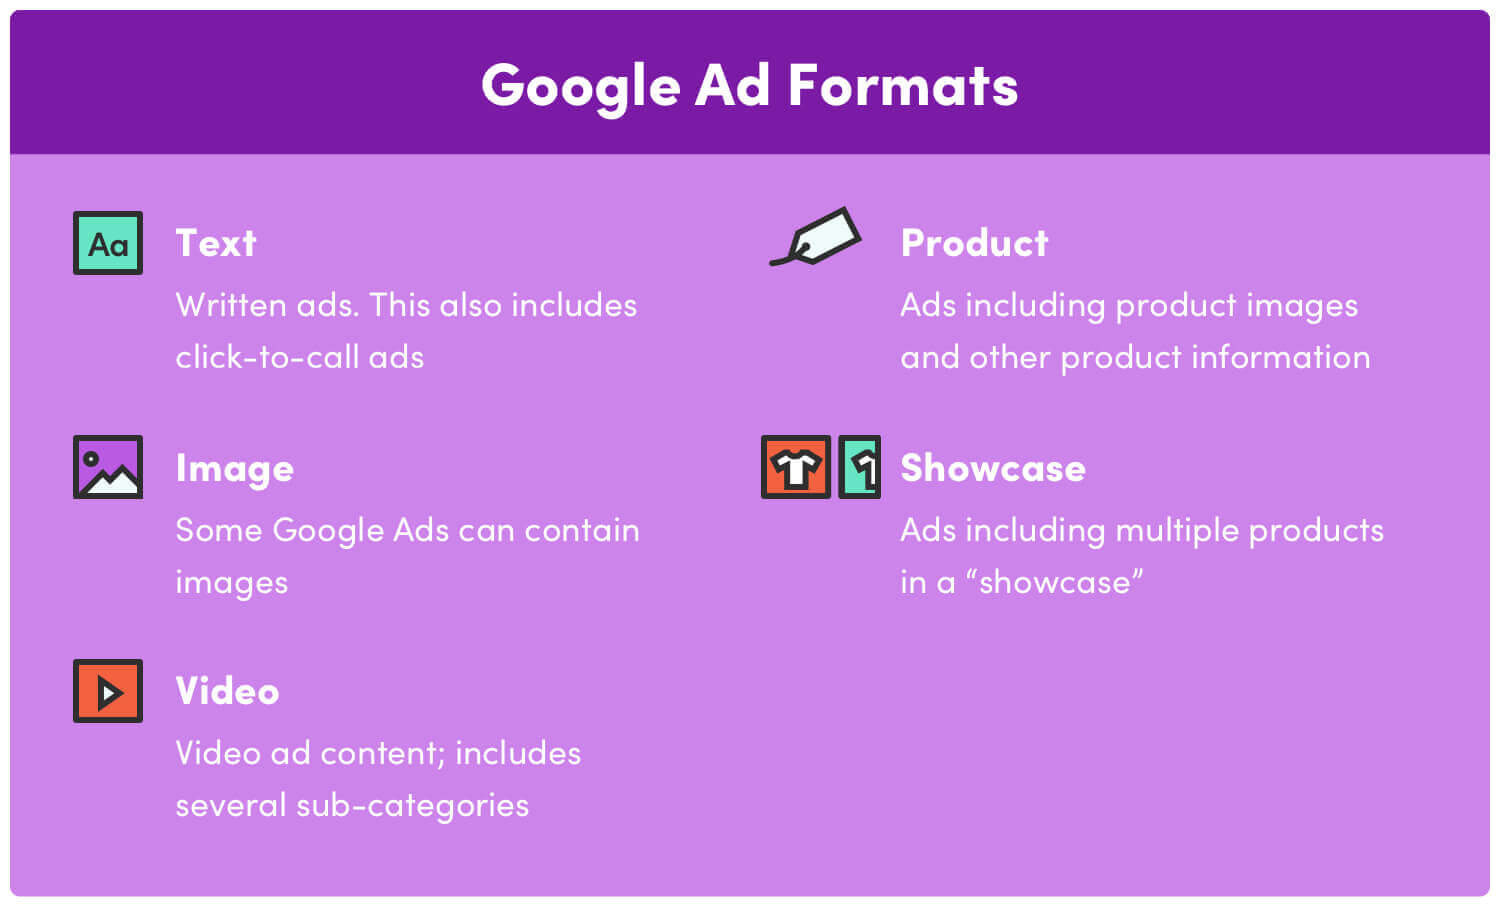 A table titled “Google Ad Formats”. There are five categories listed: Text, Image, Video, Product, and Showcase.